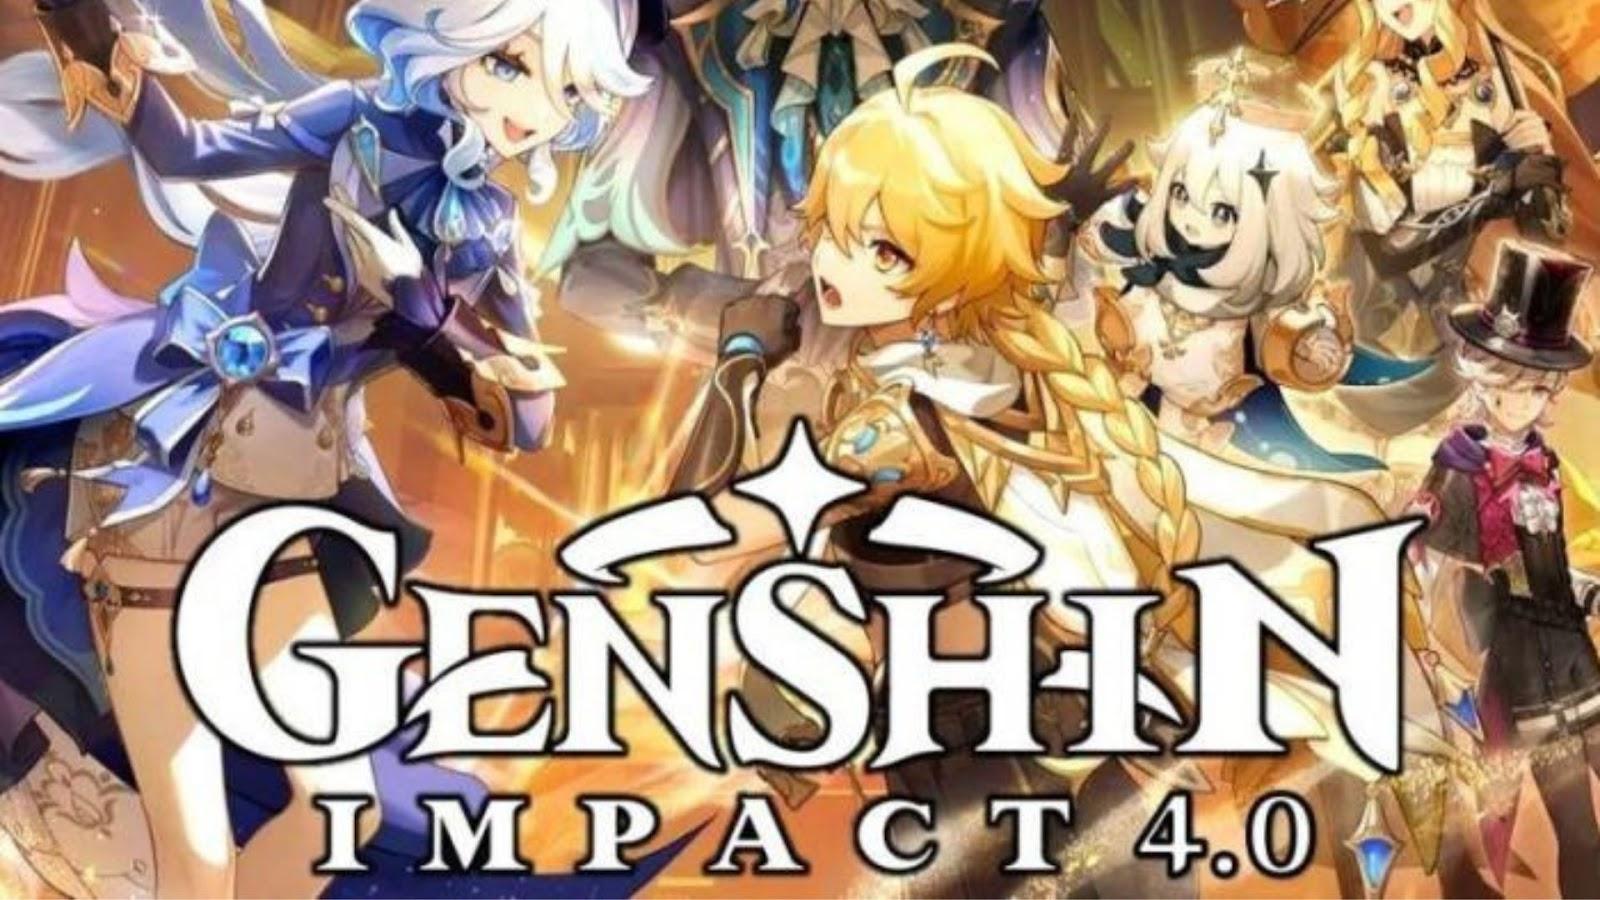 LIMITED FREE Talent Books! EZ to GET!! [Genshin Impact] 